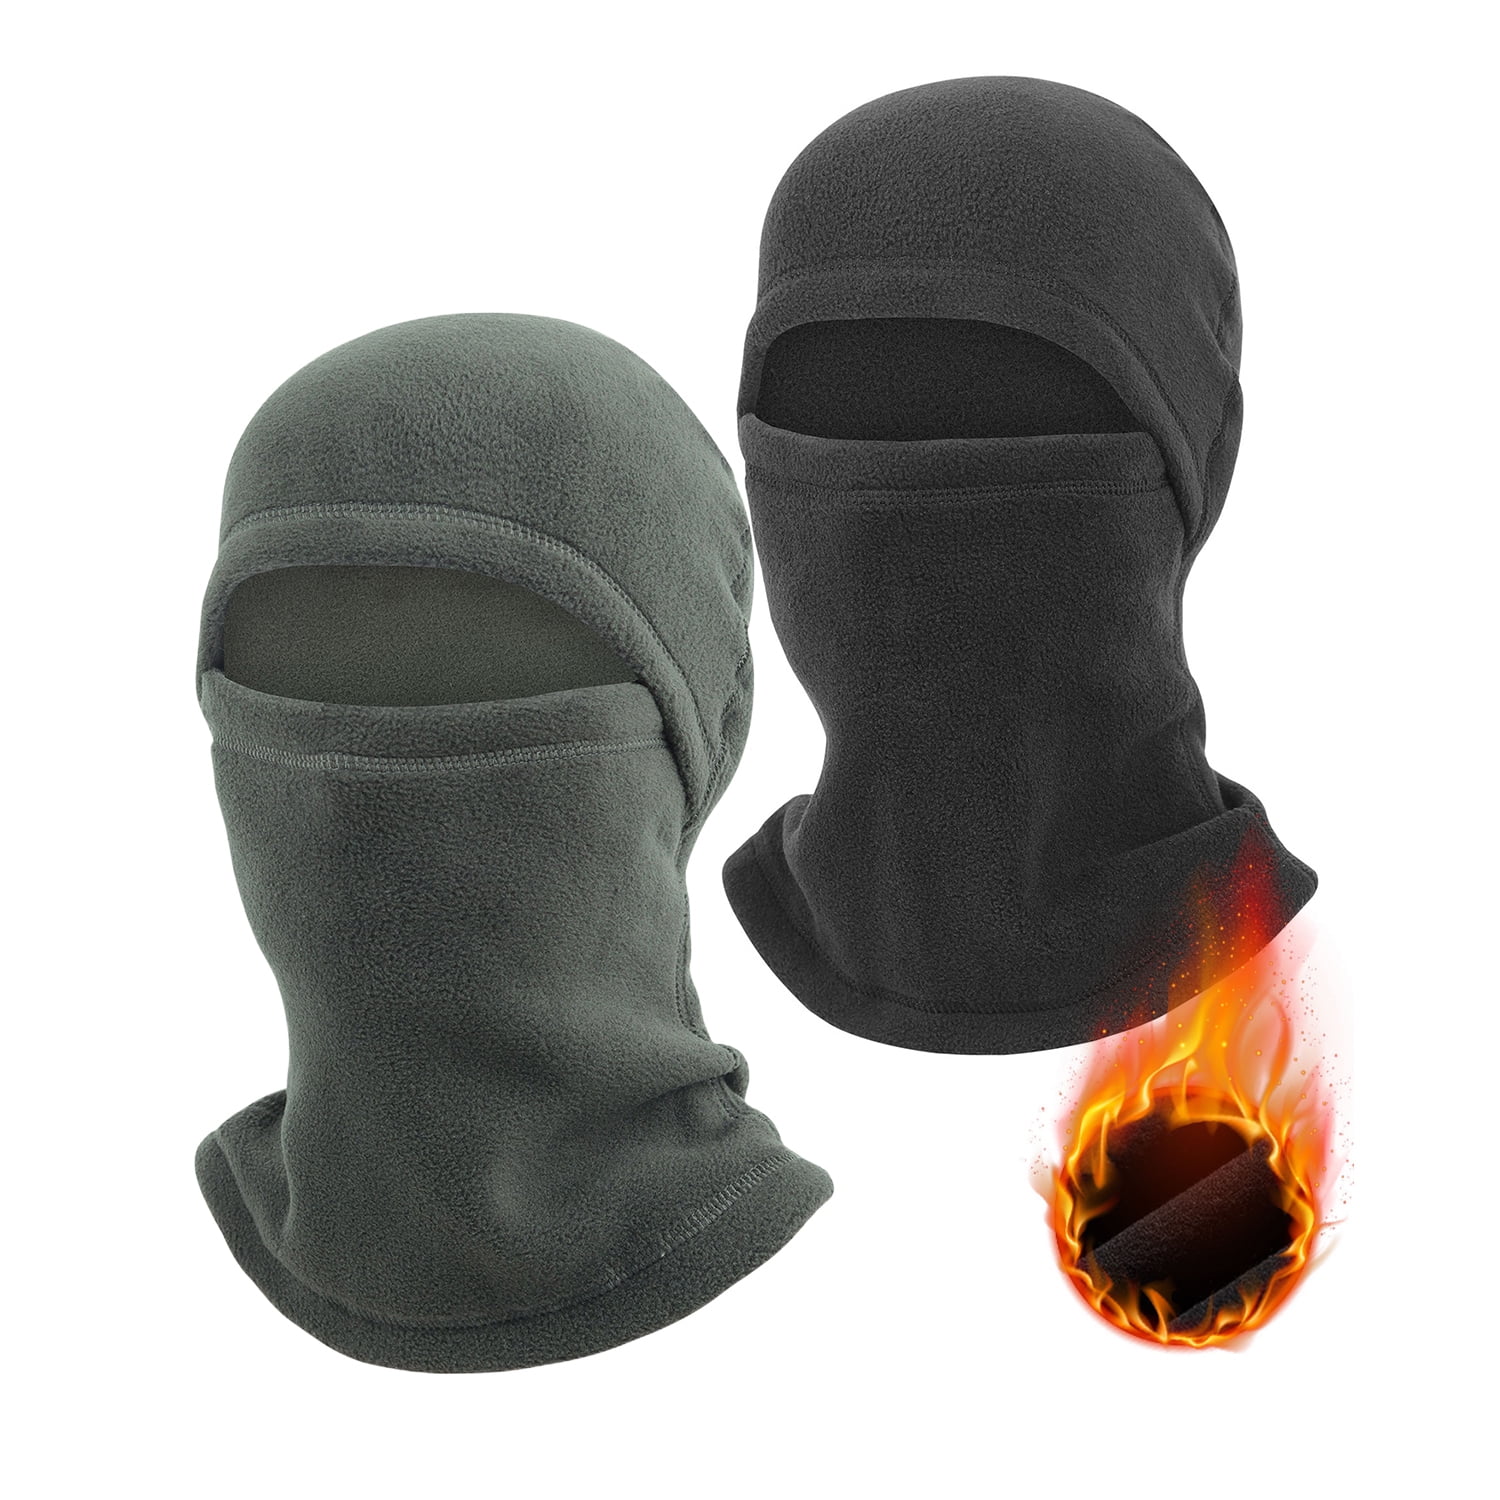 2 Pack Thermal Bacalava Hood Mask, Earmuffs and Head Cover in One for ...